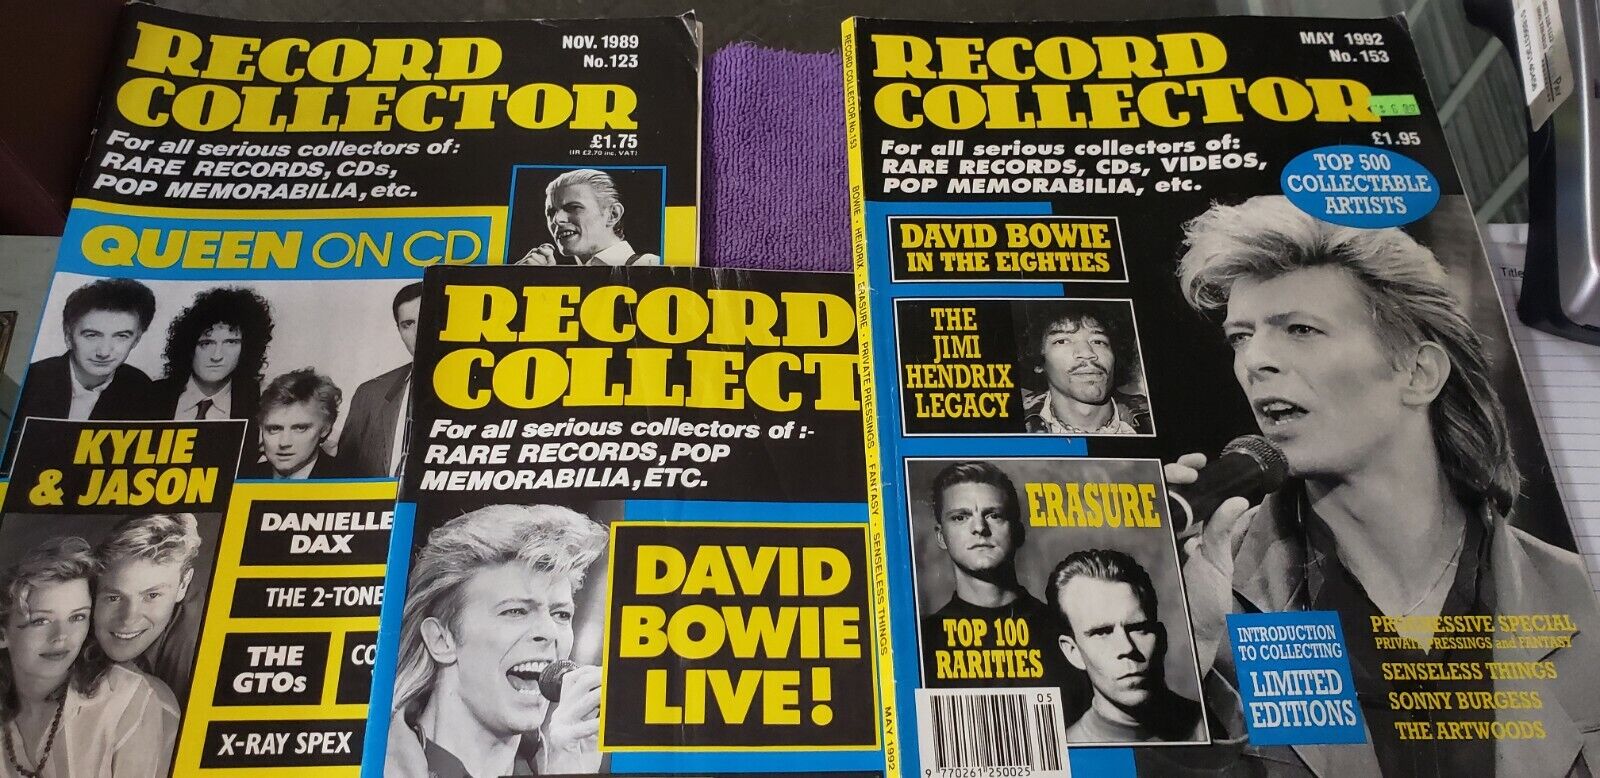 Record Collector Magazines Lot Of 3 David Bowie # 109, 123 & 153